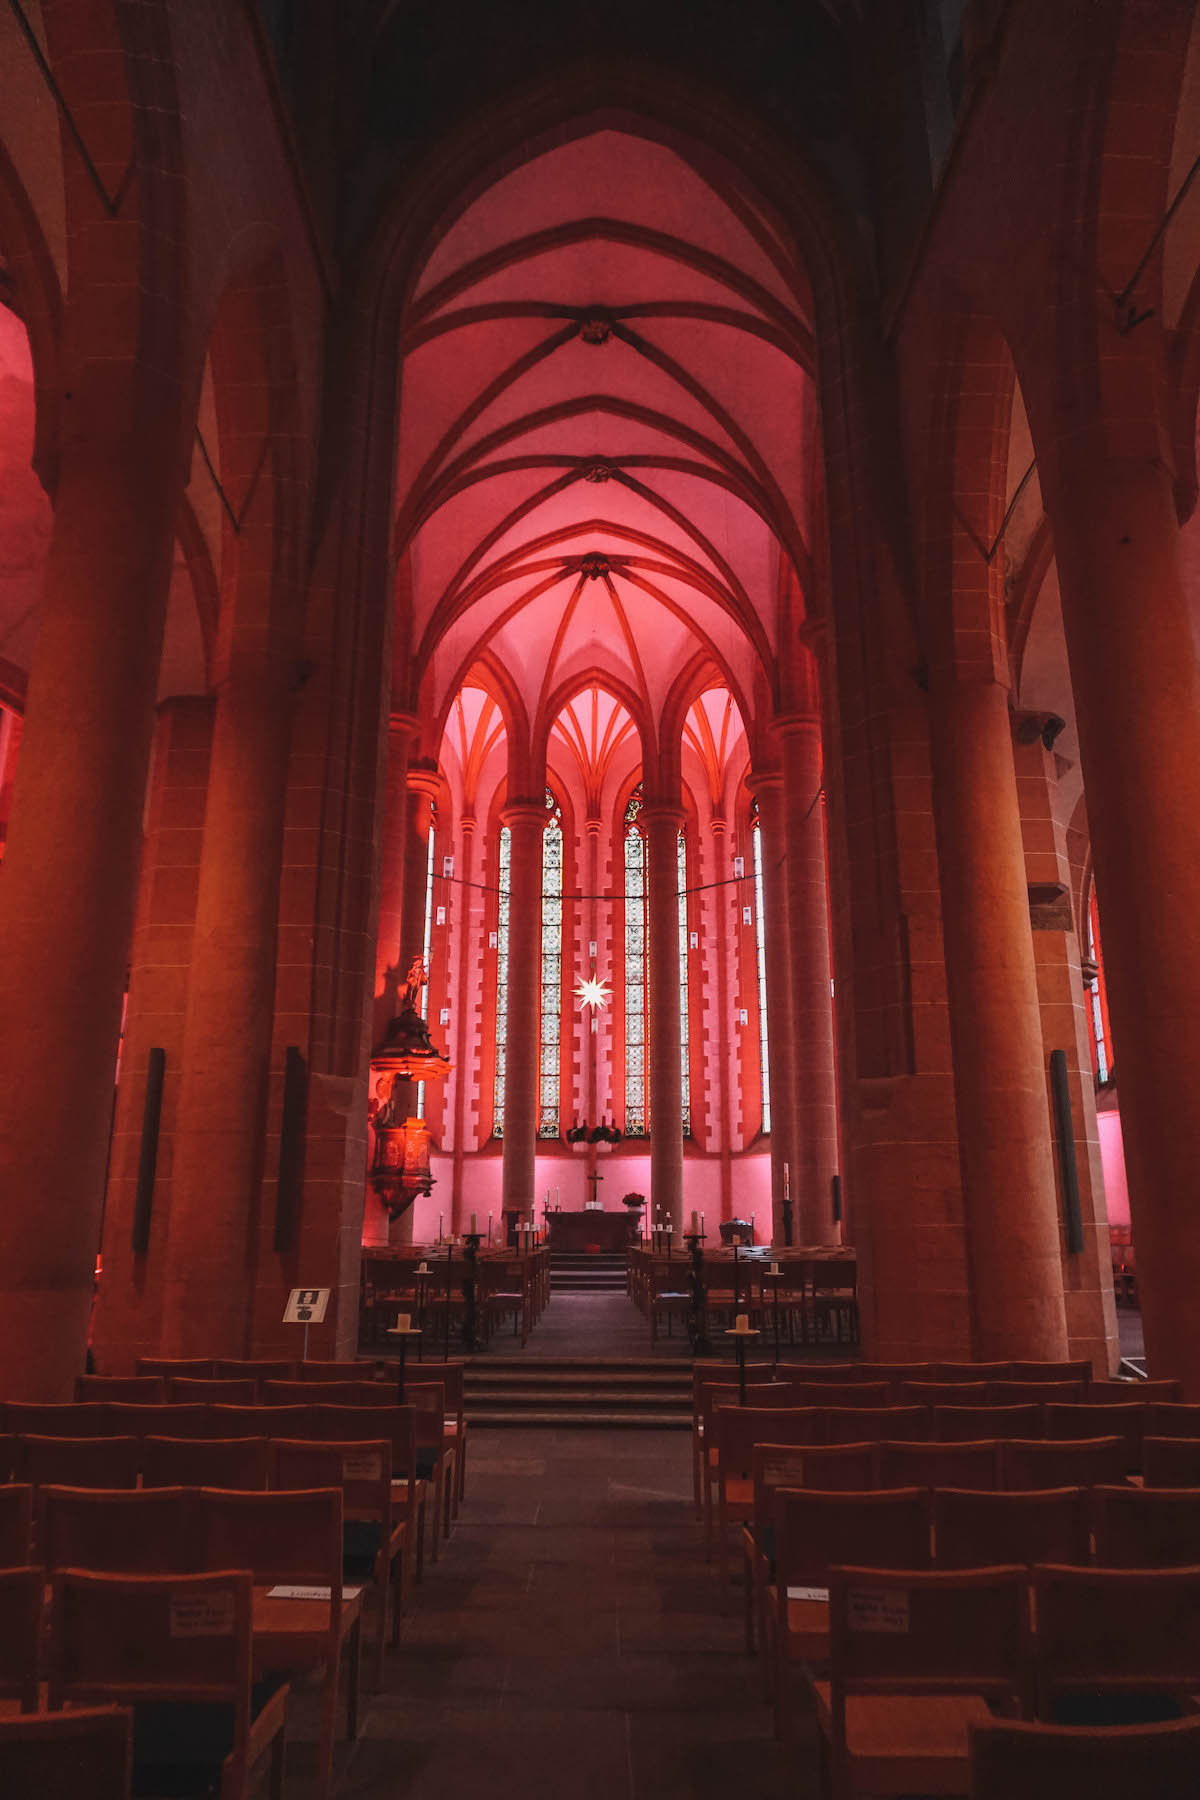 Inside the Church of Our Lady in Heidelberg